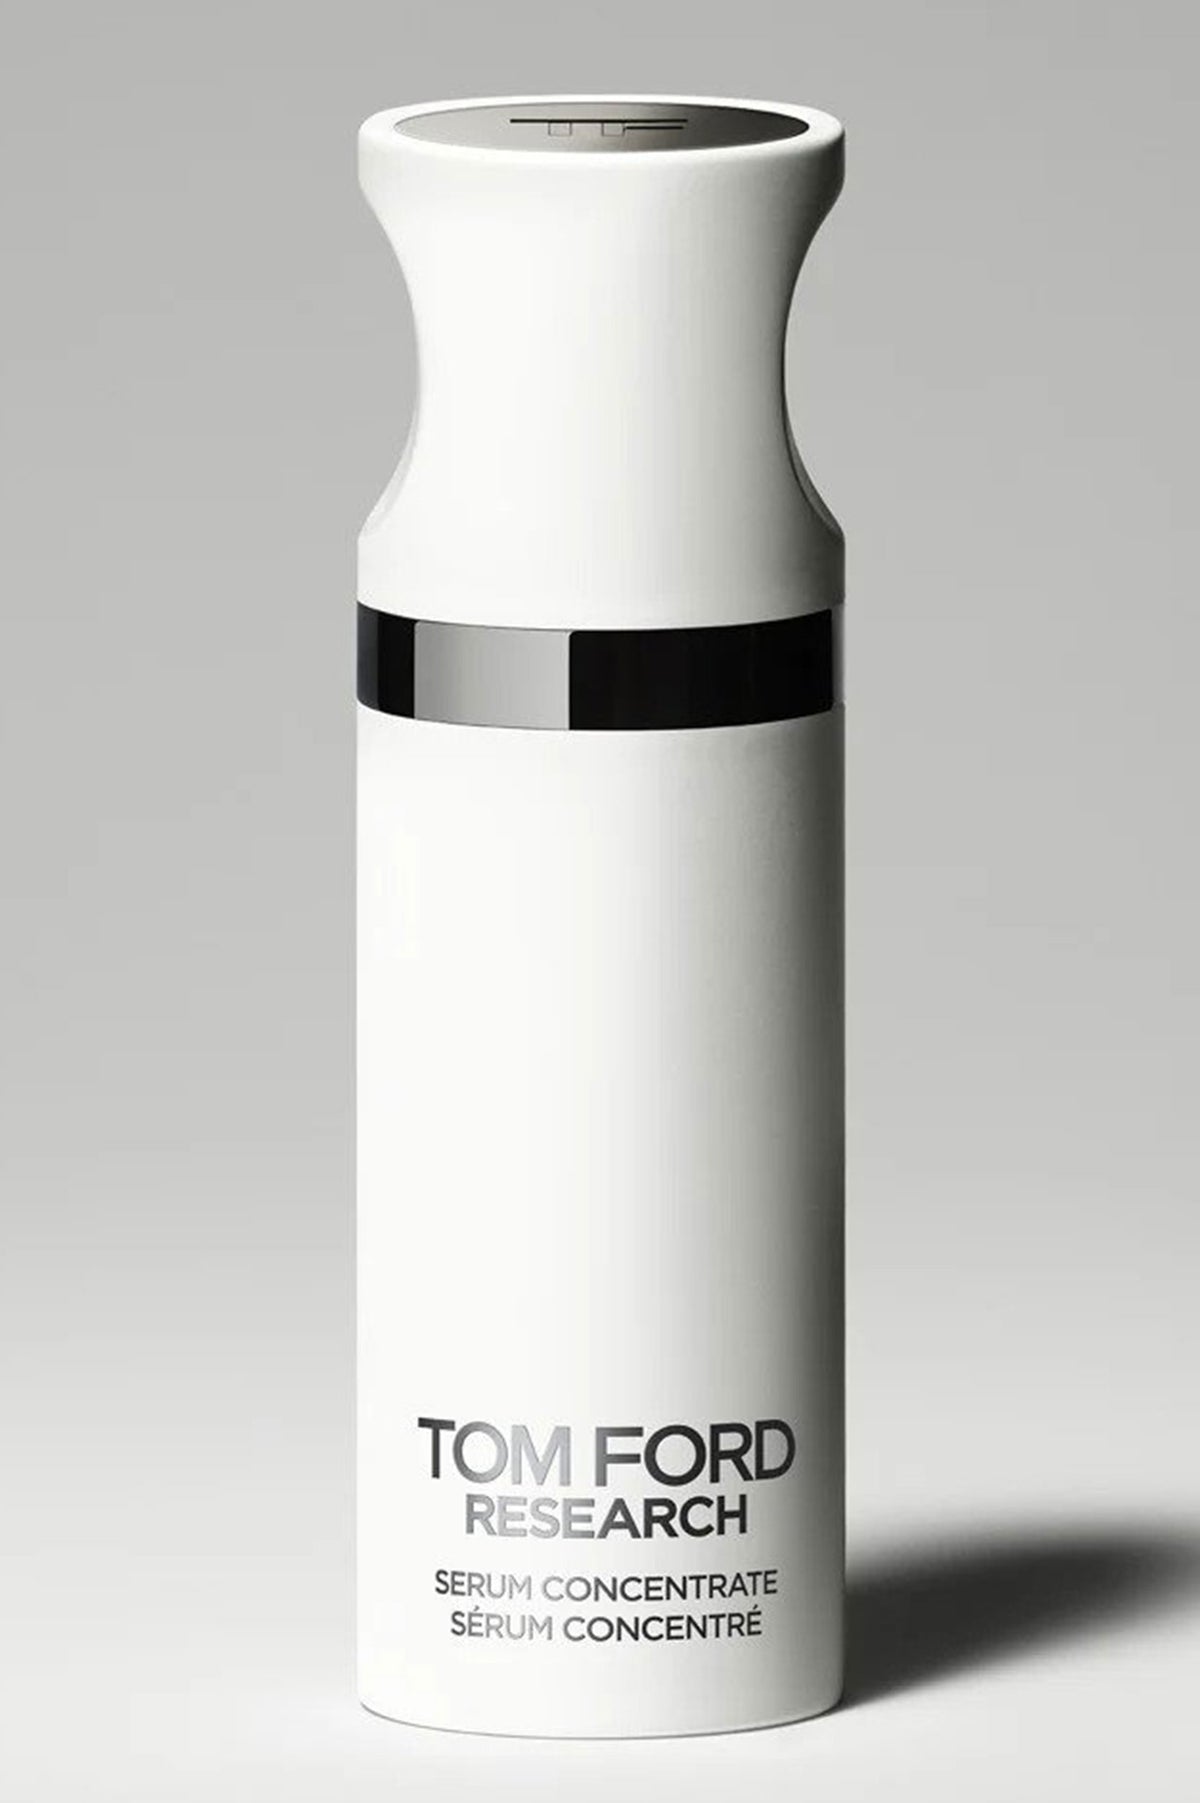 TOM FORD RESEARCH SERUM